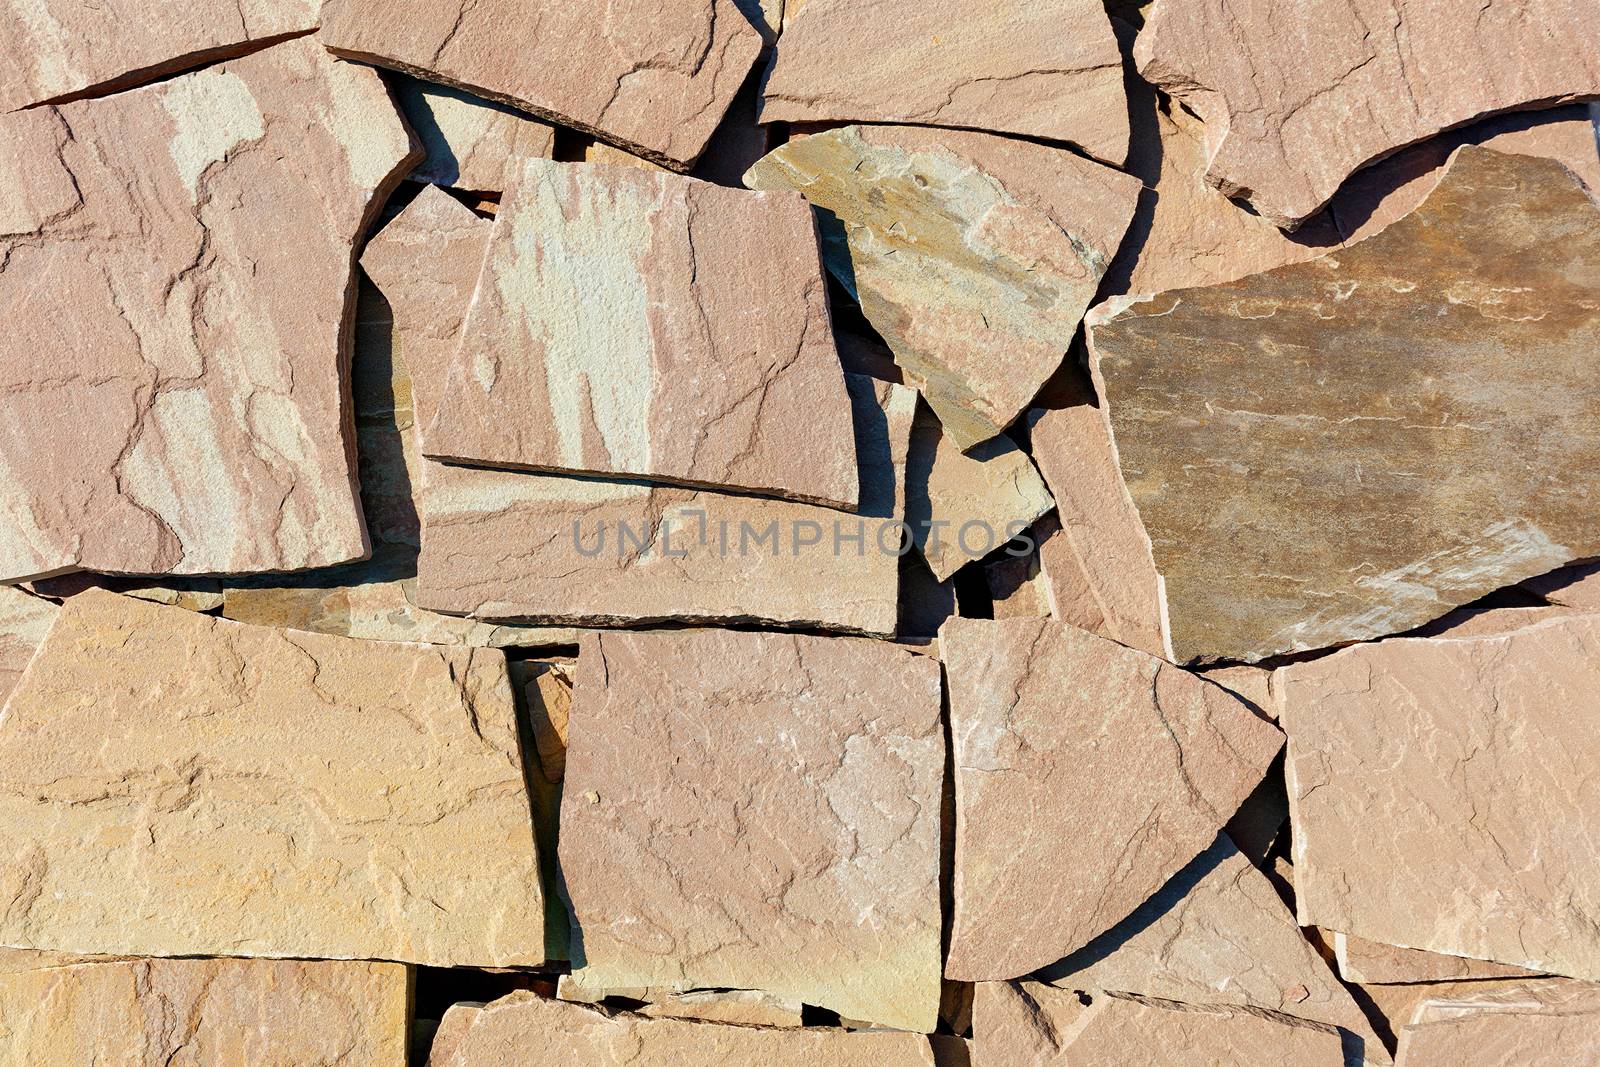 Texture and background of large slabs of brown sandstone in harsh sunlight.